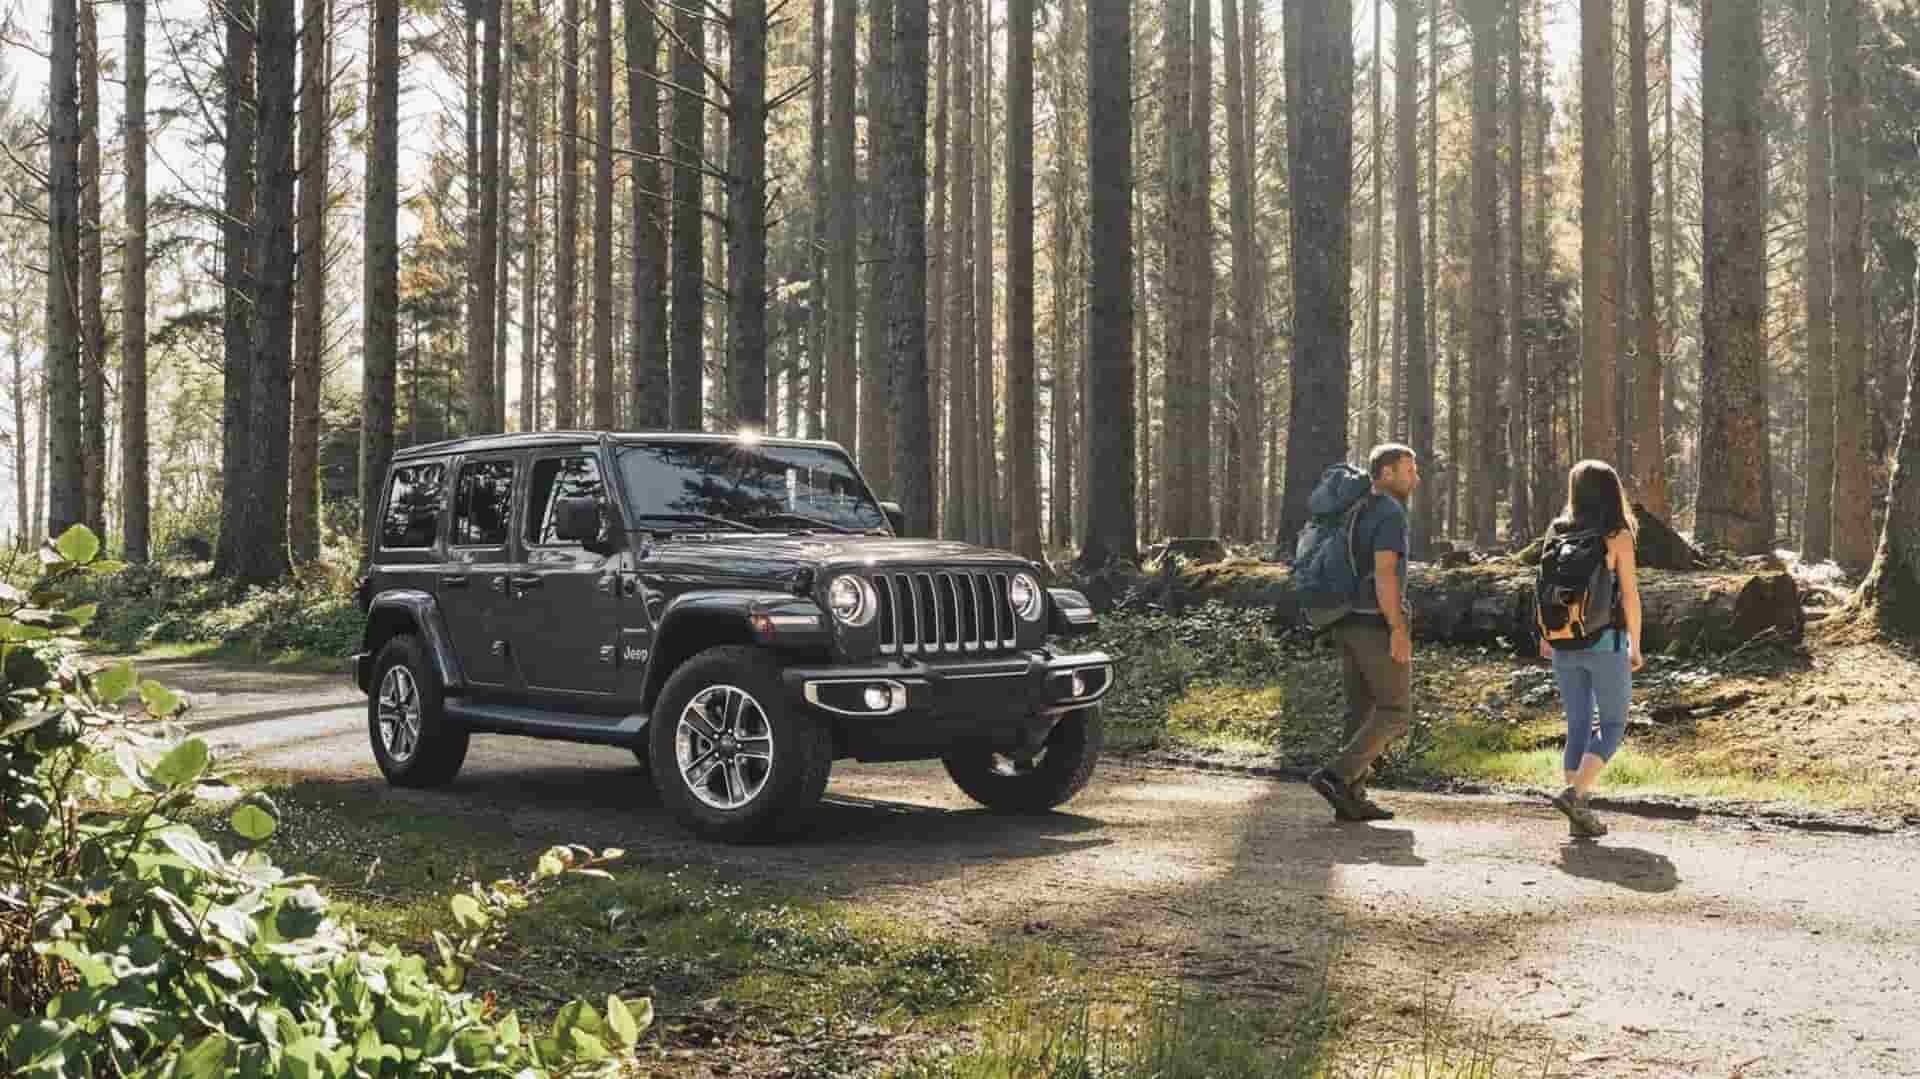 What's new with the 2020 Jeep Wrangler near Mayfield OH